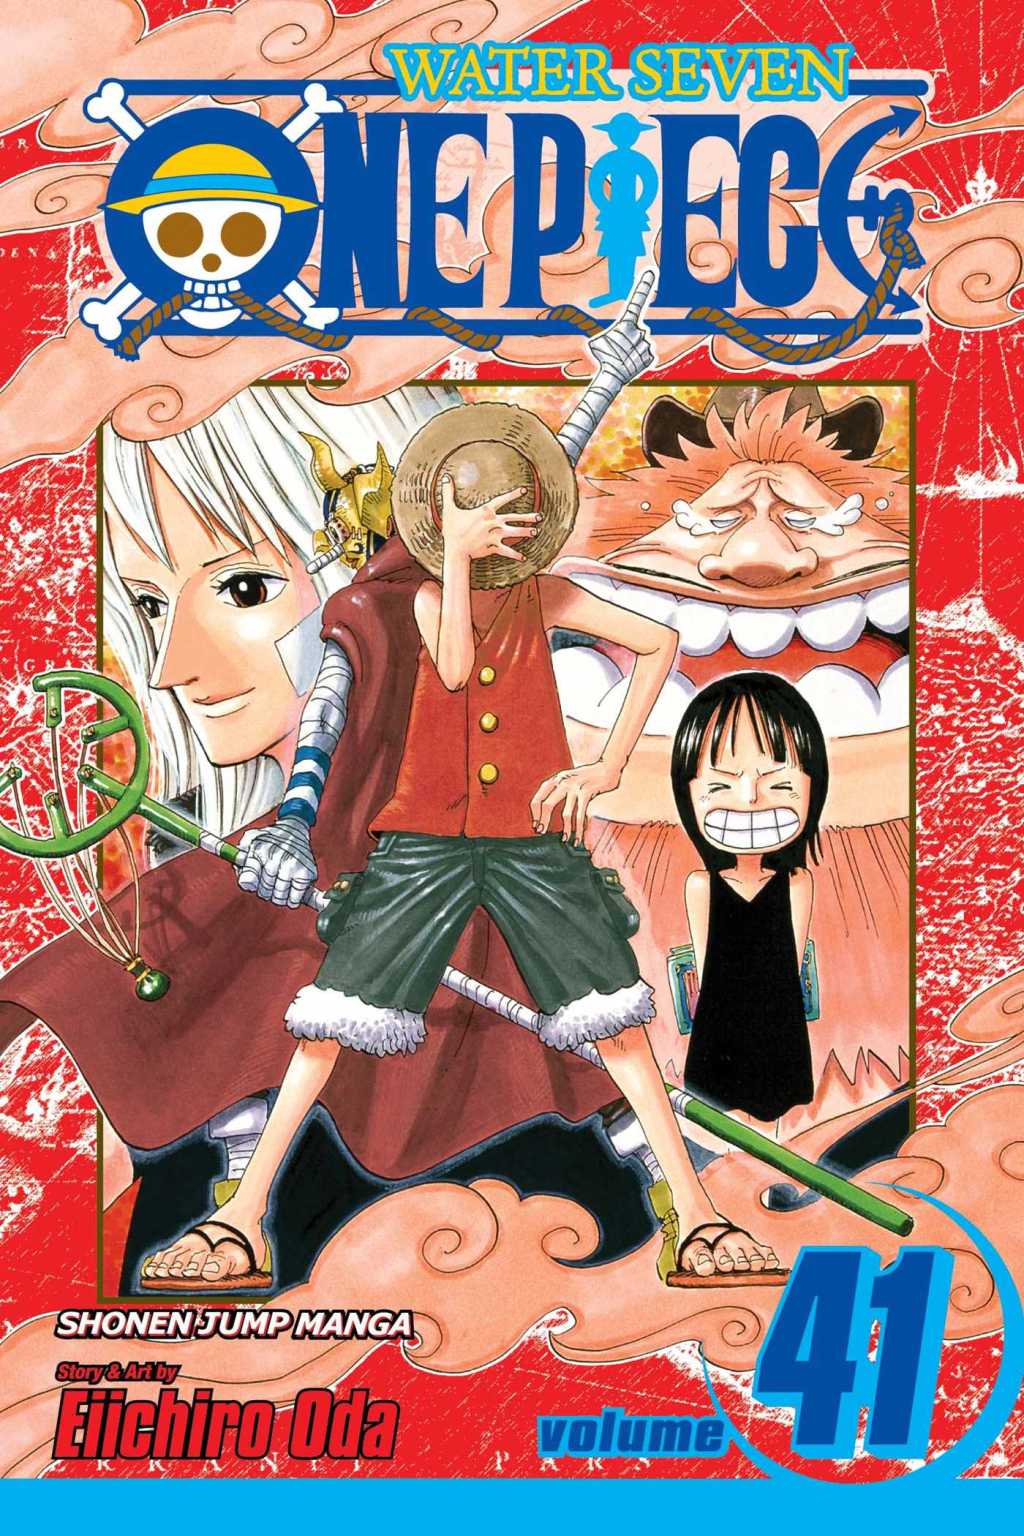 Luffy and Sogeking stand ahead of the memories of Robin's past on Eiichiro Oda's cover to One Piece. Vol. 41 "Declaration of War" (2006), Shueisha